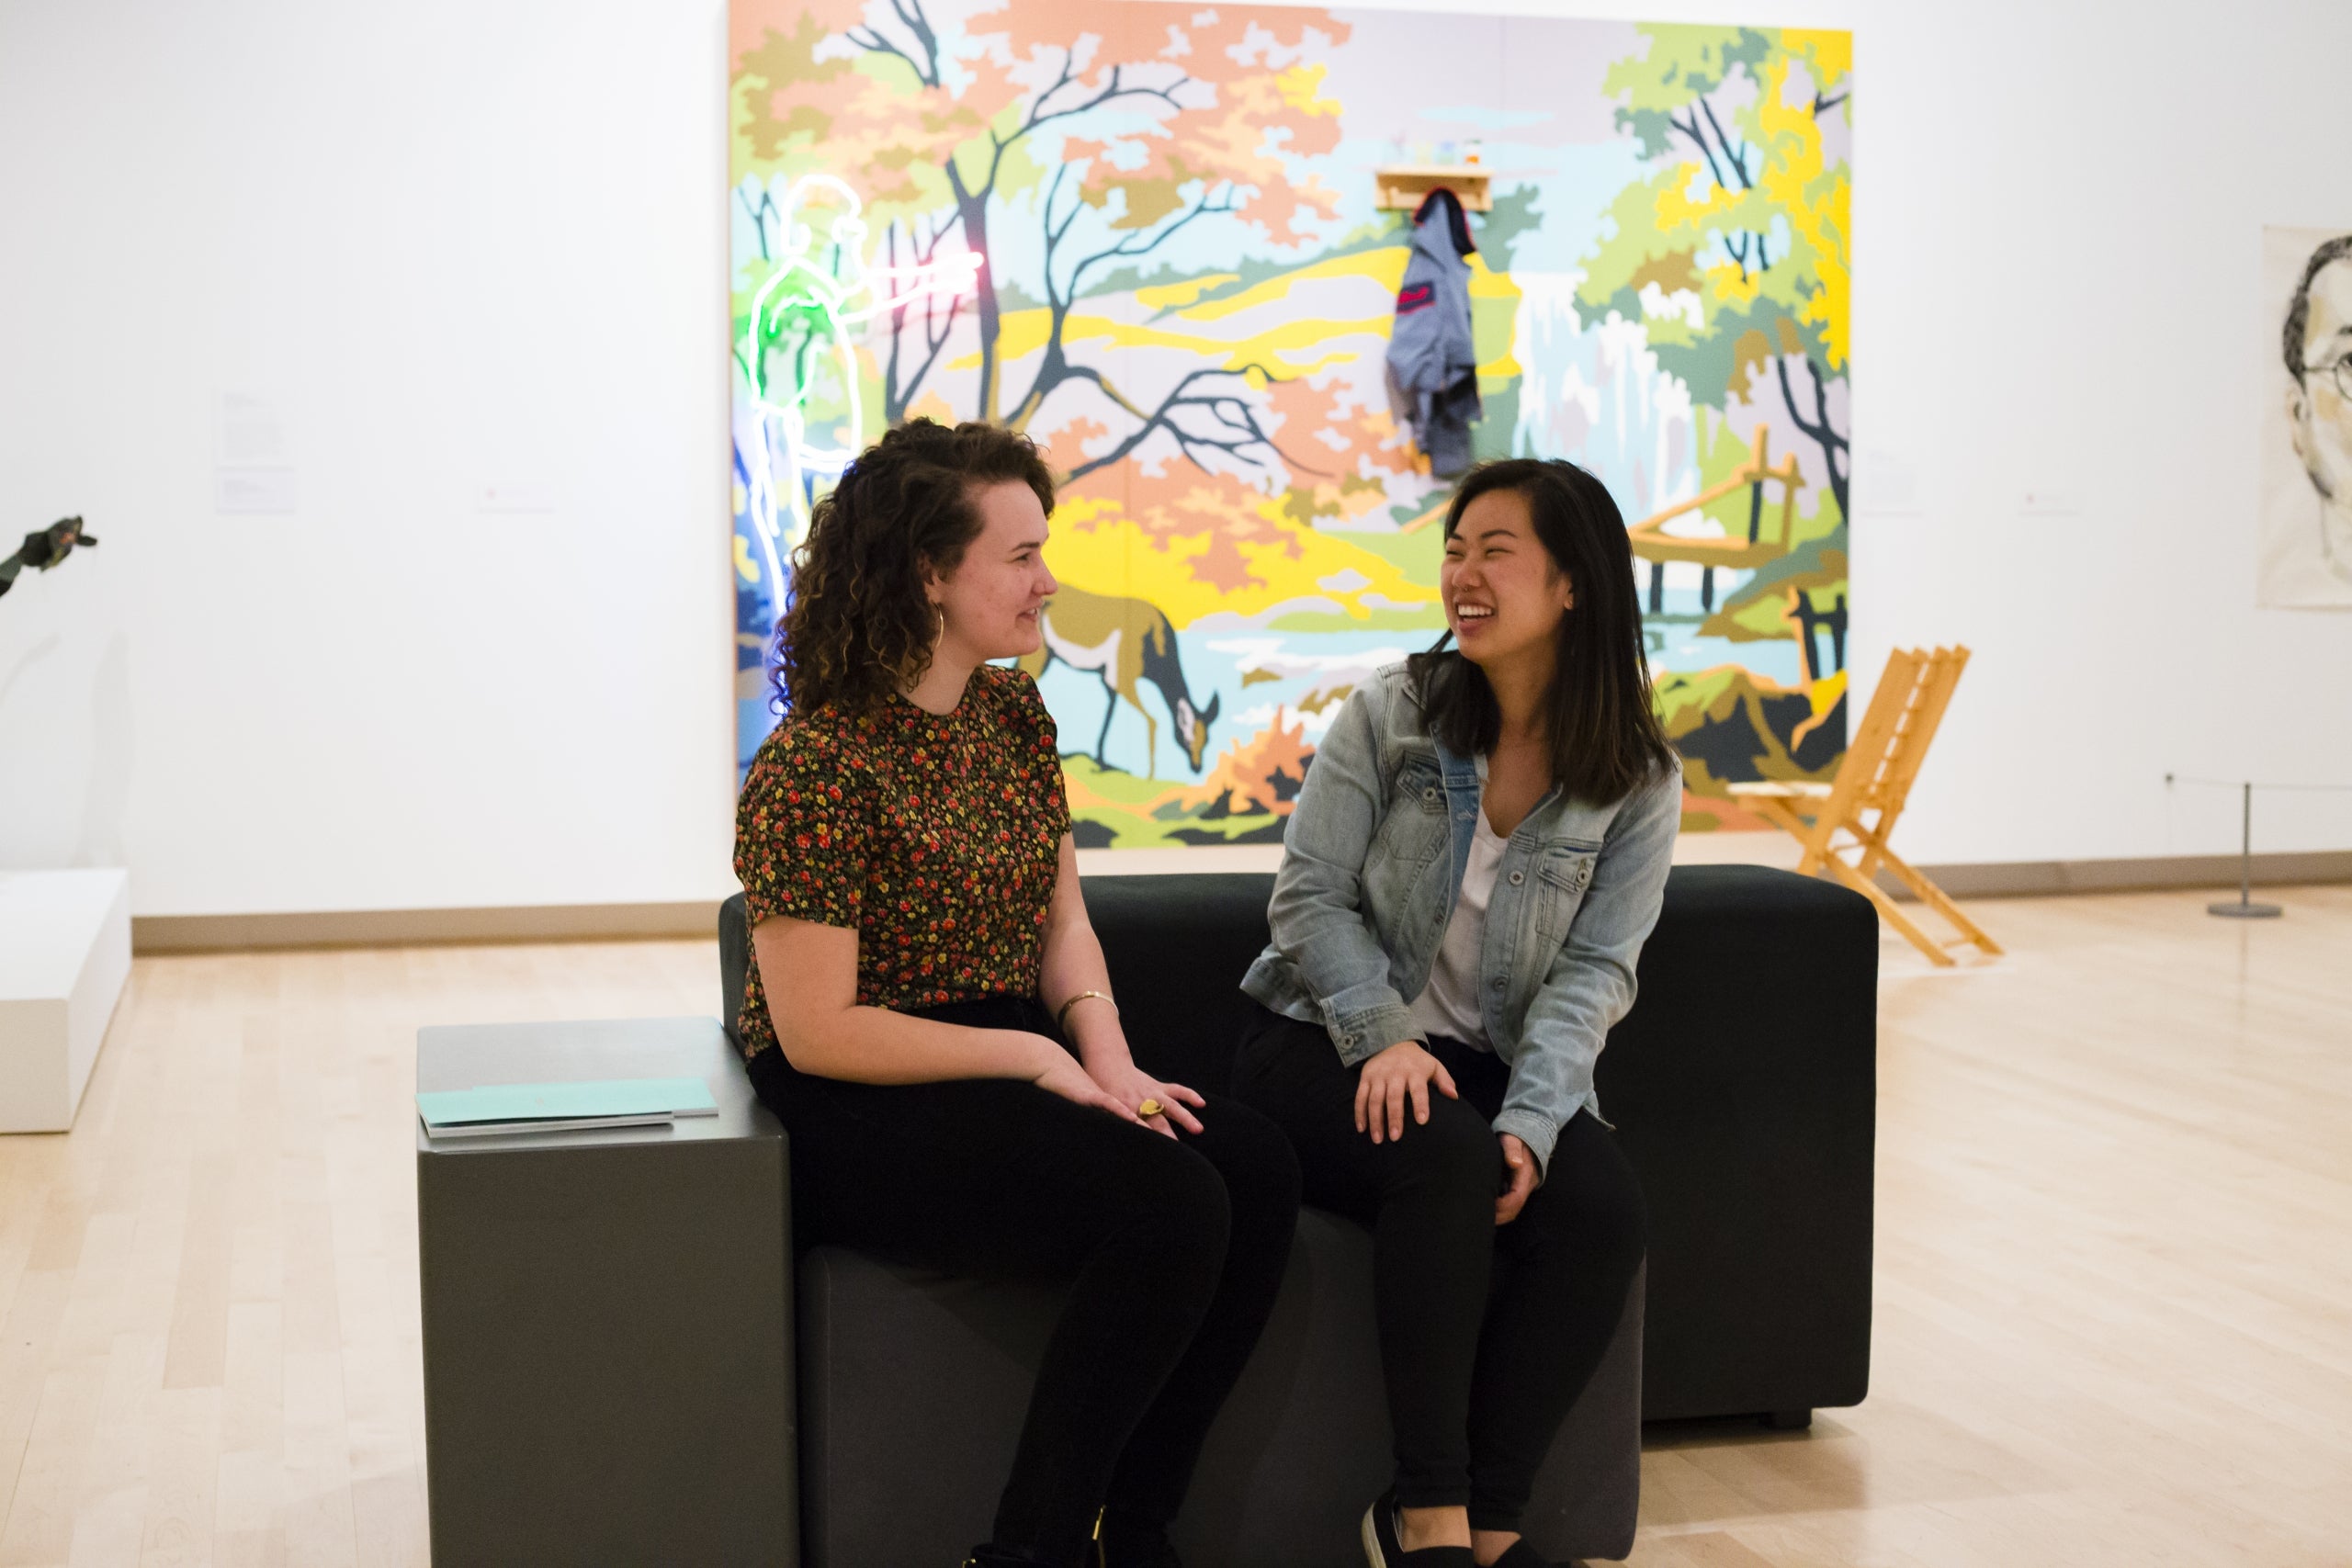 Two visitors chatting while sitting on a bench in the gallery. Behind them is a colorful work of art hanging on the wall.